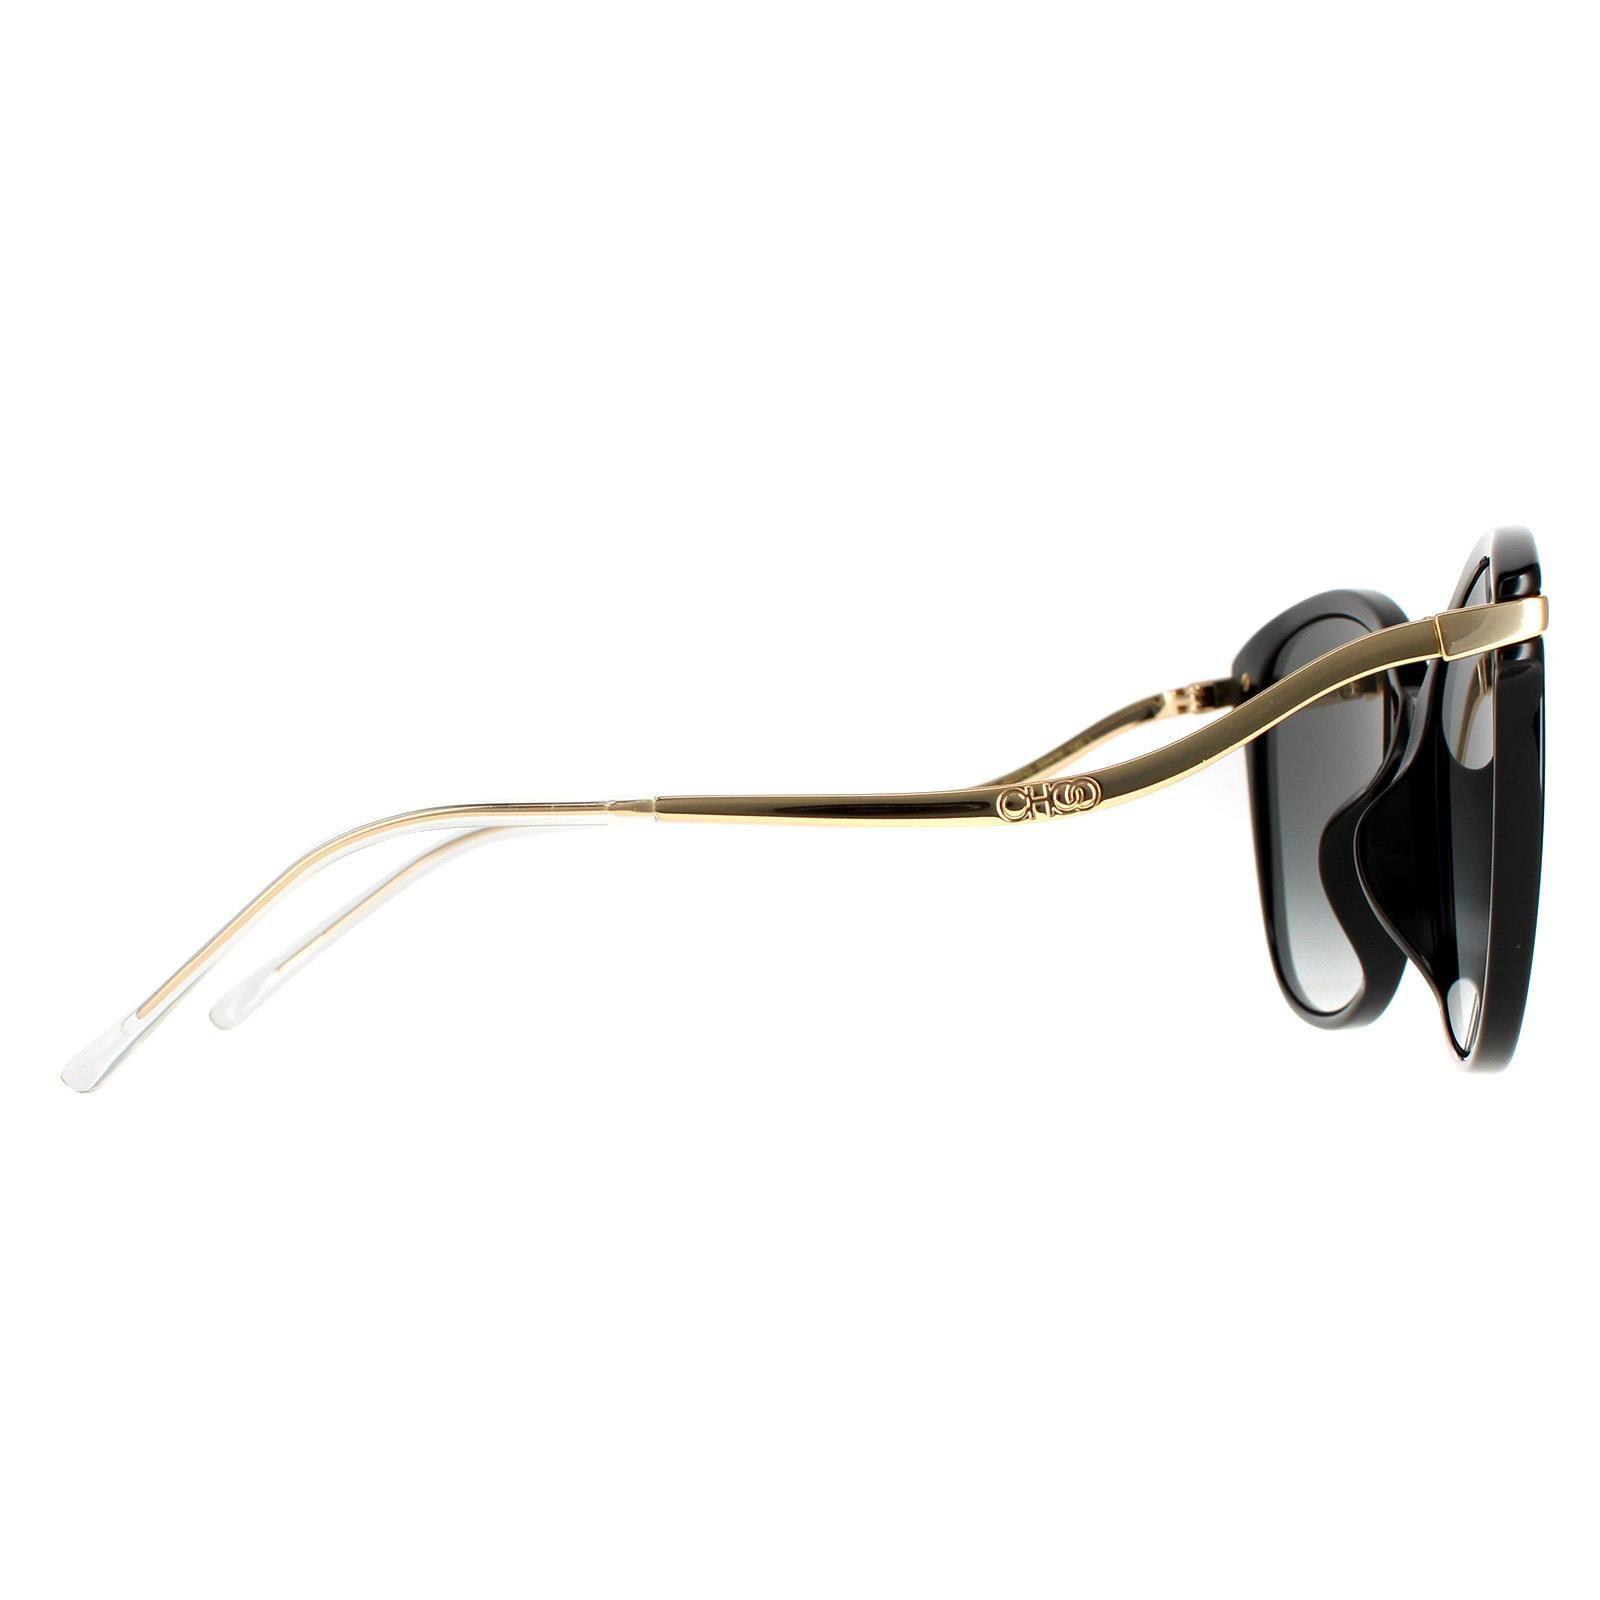 Jimmy Choo CatEye Womens Black Grey Gradient Gold Mirror Peg/F/S  Jimmy Choo are a cat eye style crafted from lightweight acetate. The Jimmy Choo logo is engraved into the wavy designed temples for brand authenticity